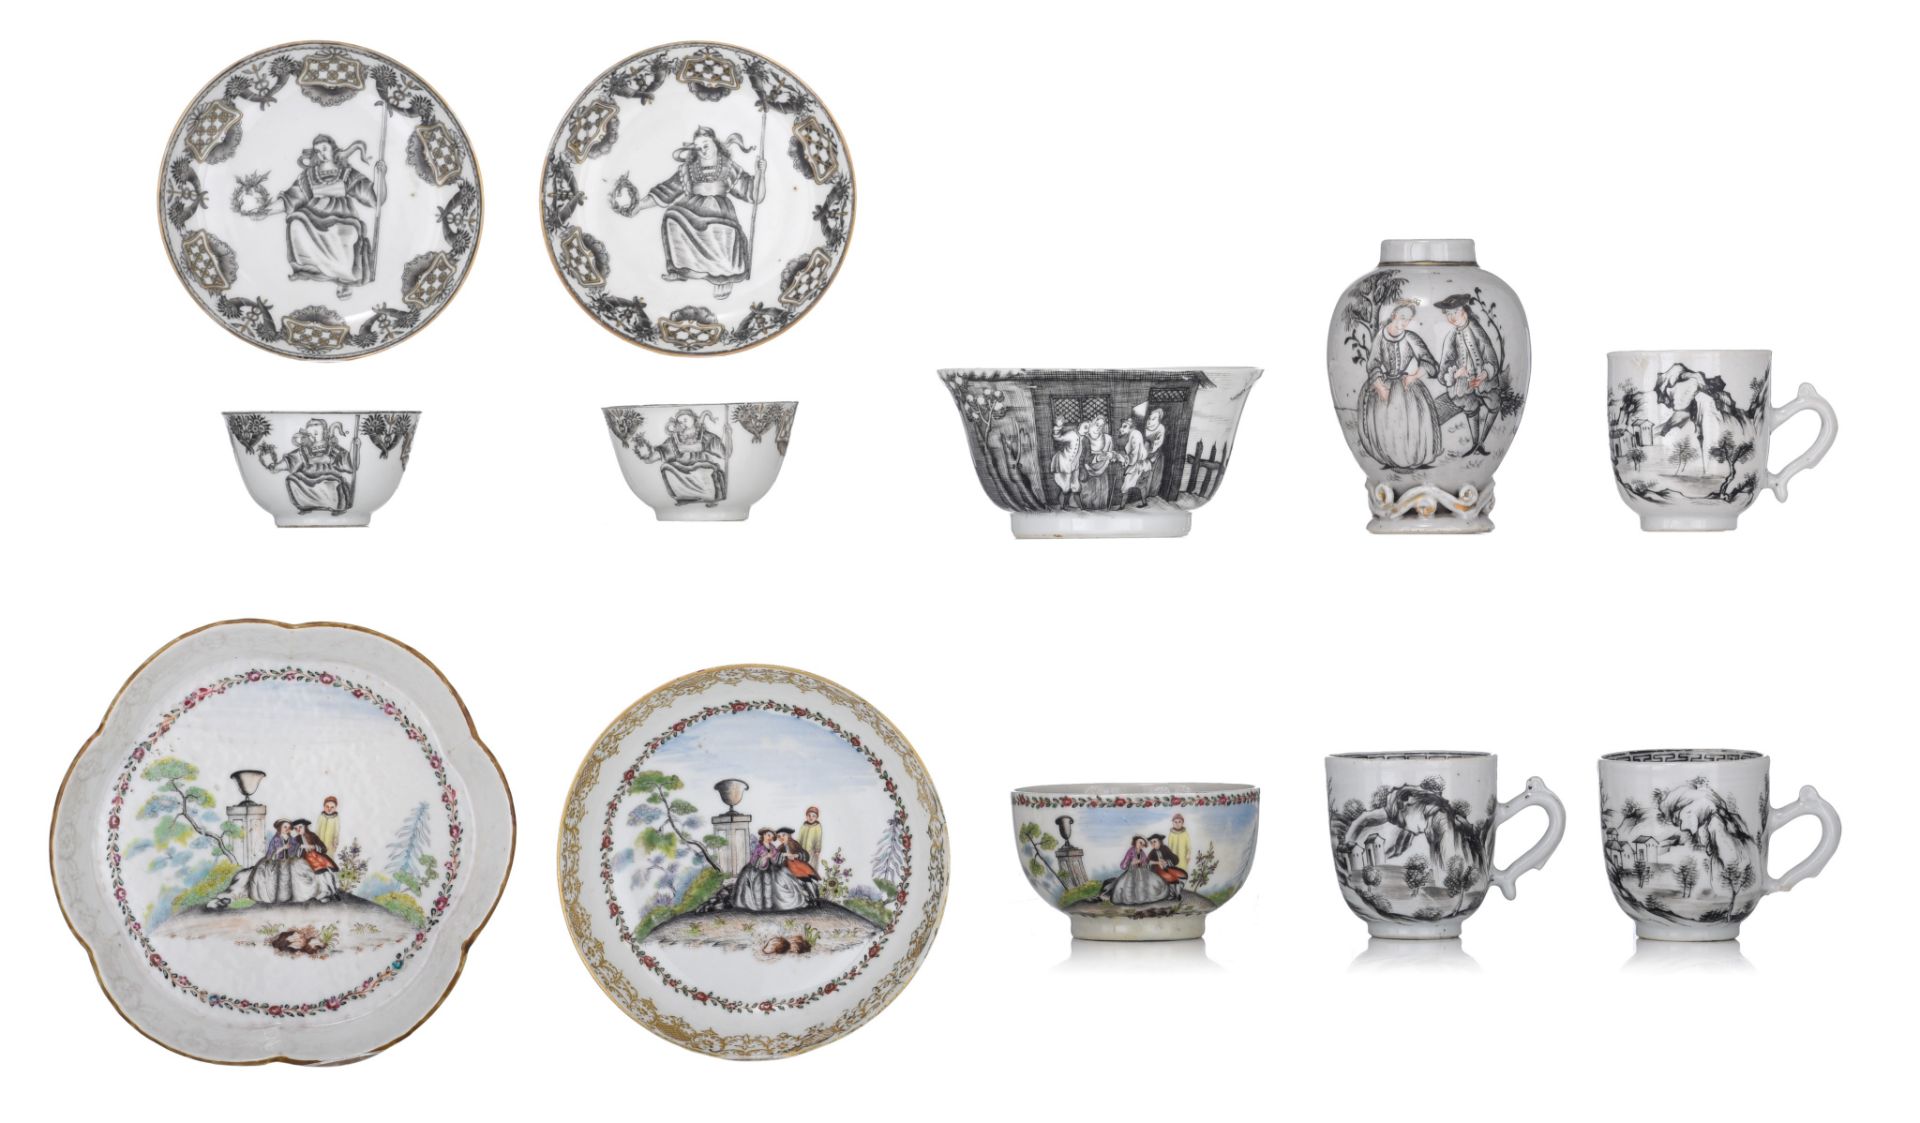 (BIDDING ONLY ON CARLOBONTE.BE) A collection of Chinese grisaille and famille rose 'European subject